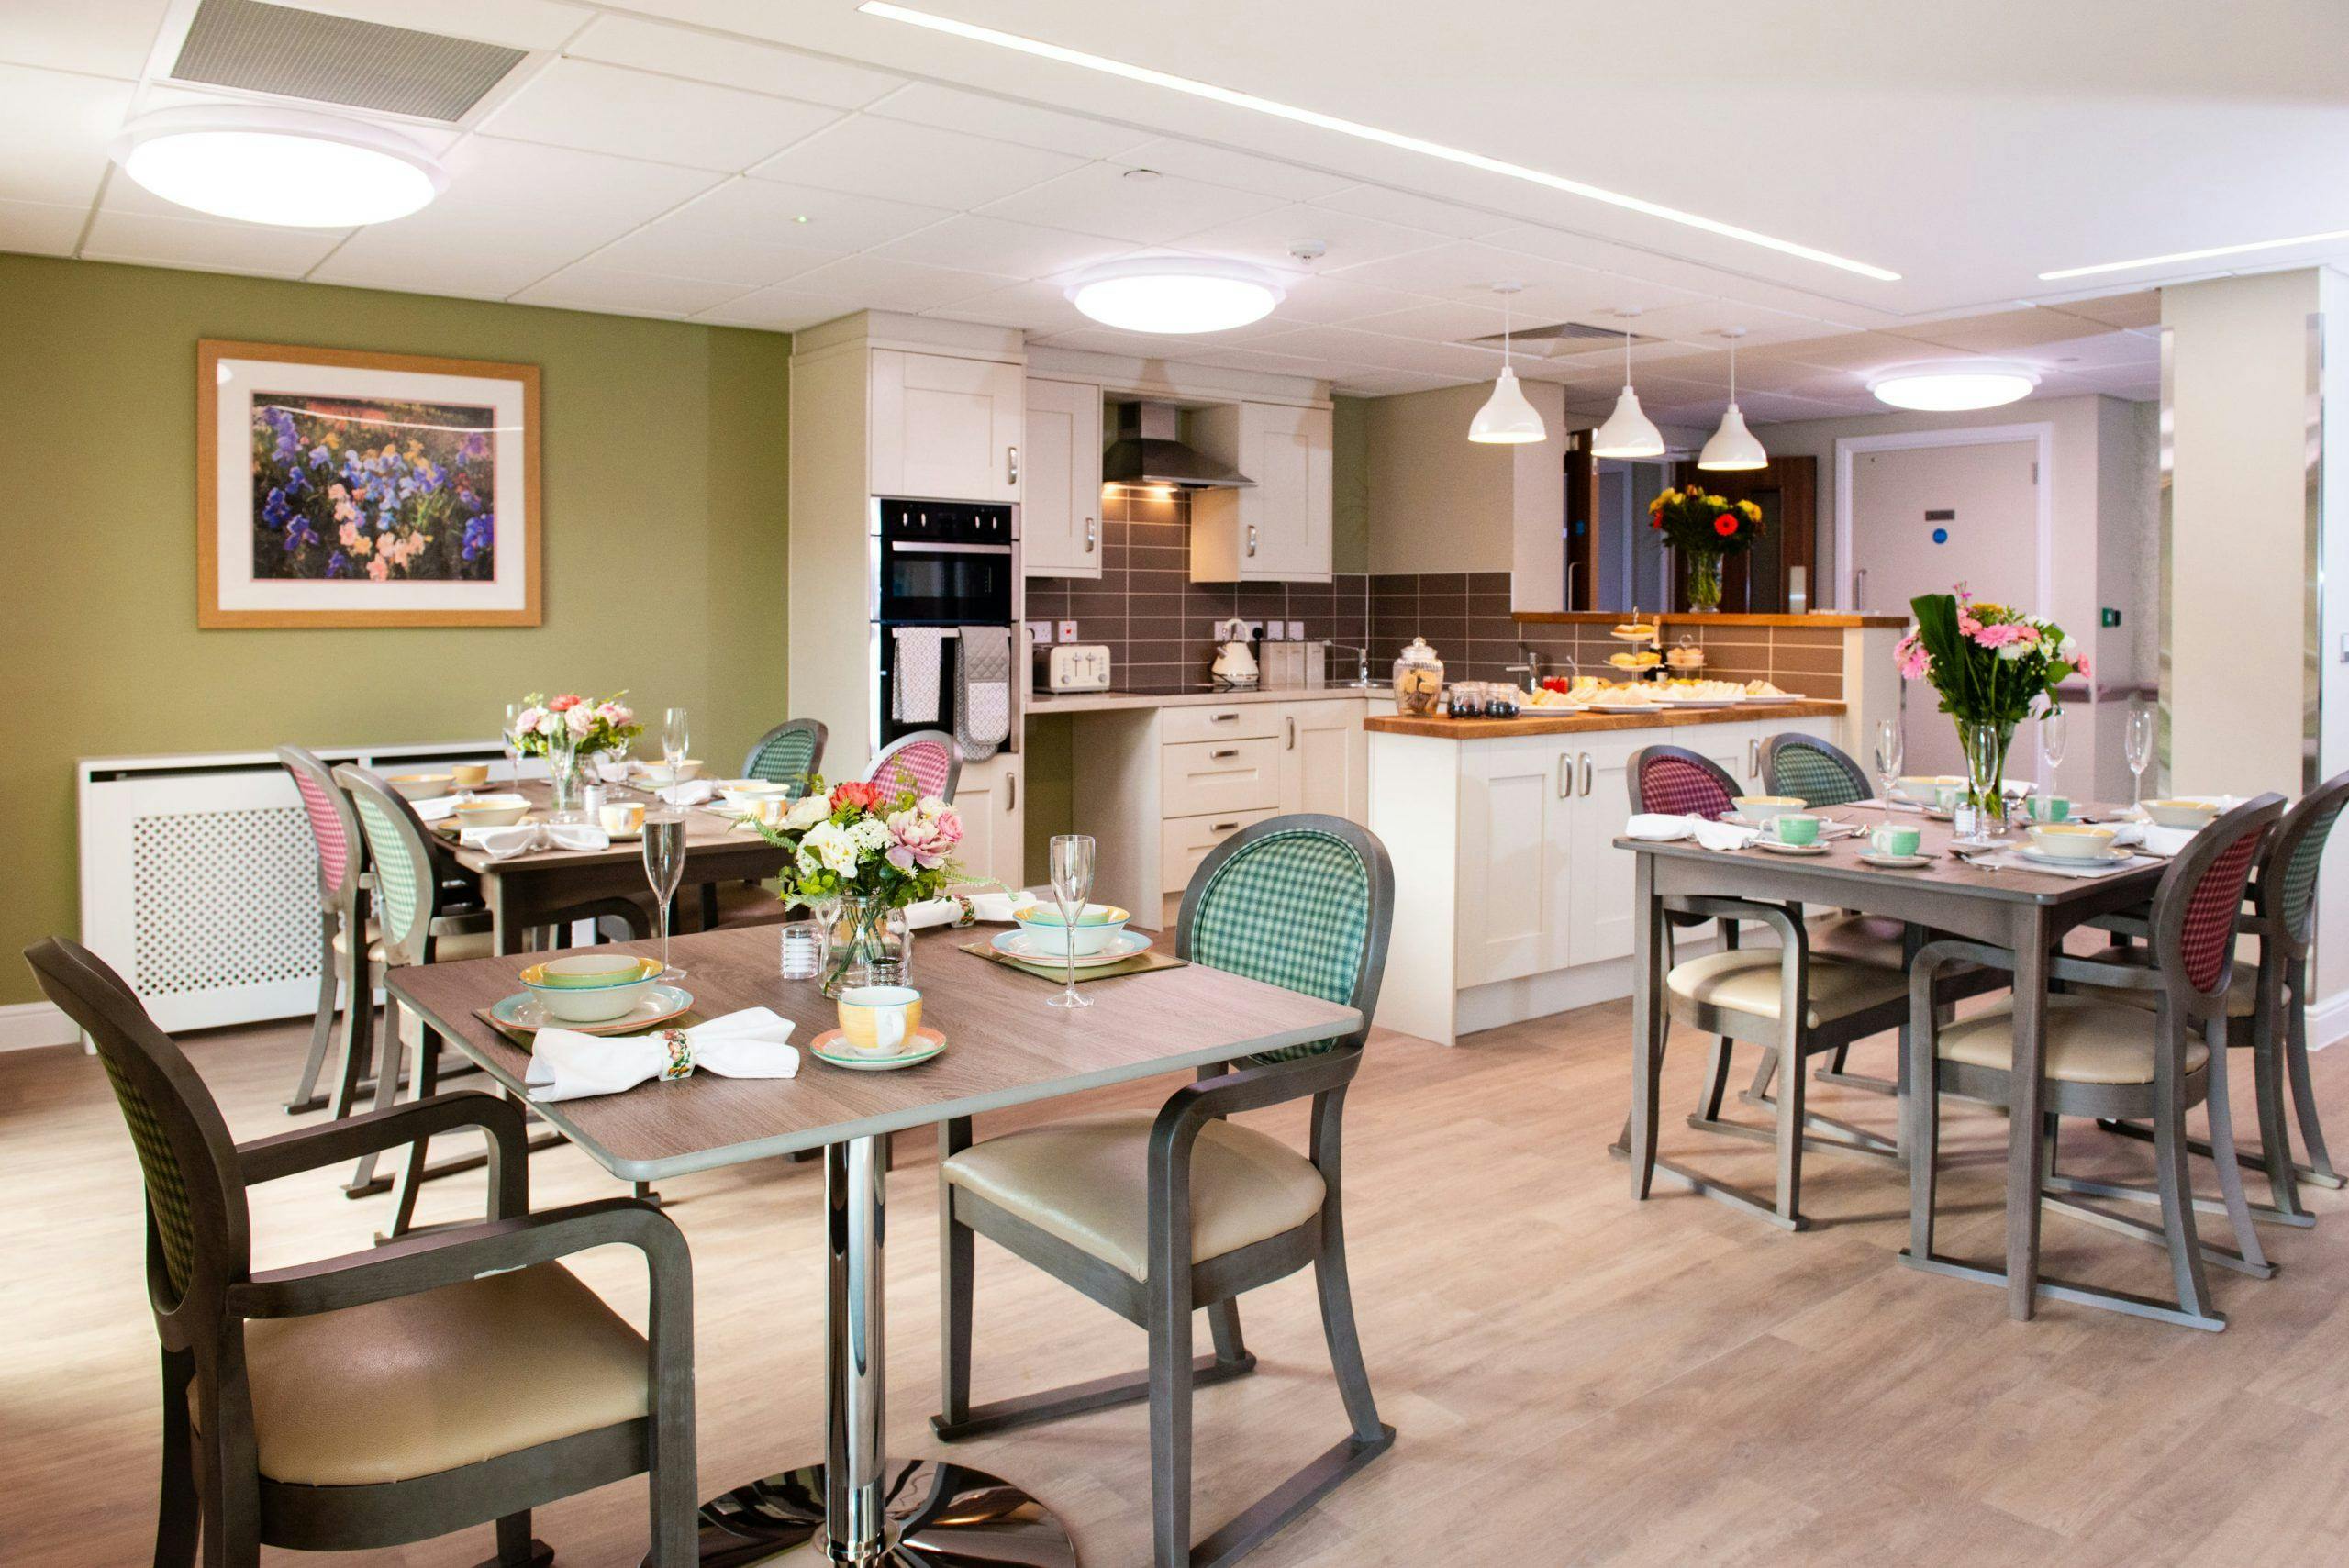 Dining area of Heanor Park Care Home in Ripley, Derbyshire